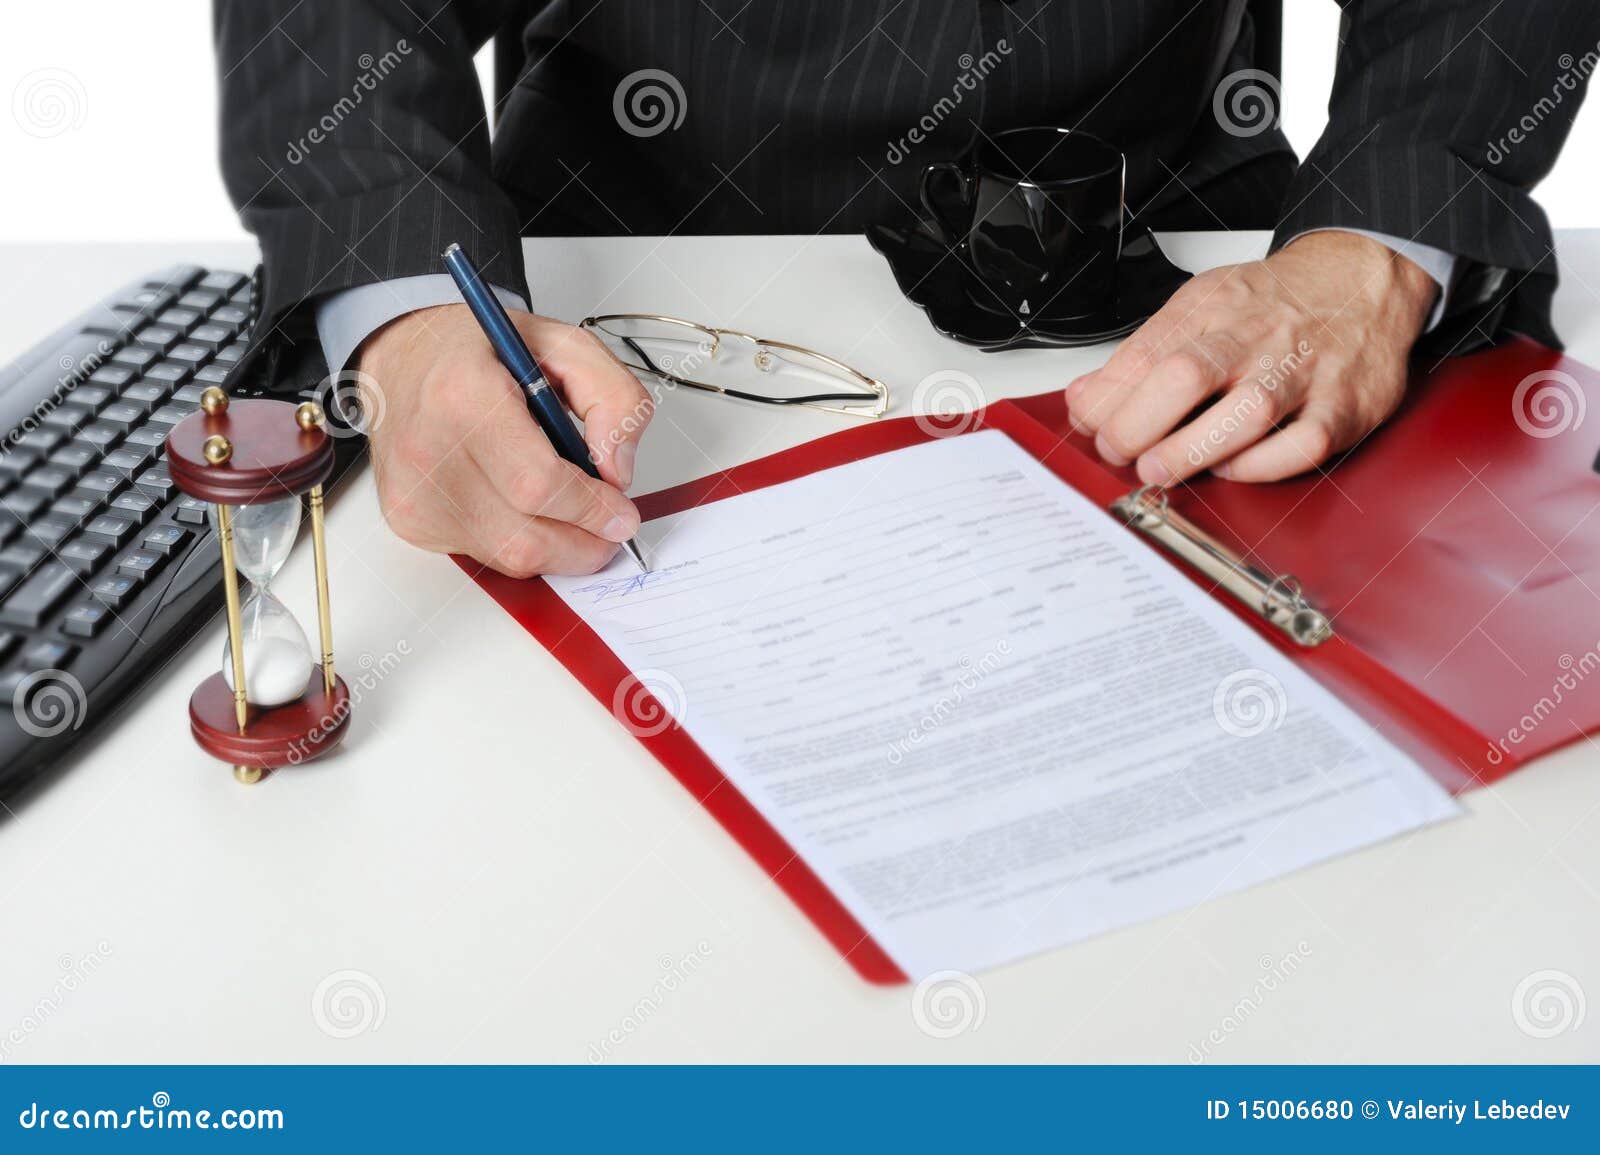 Businessman Signs a Contract. Stock Photo - Image of keypad, attention